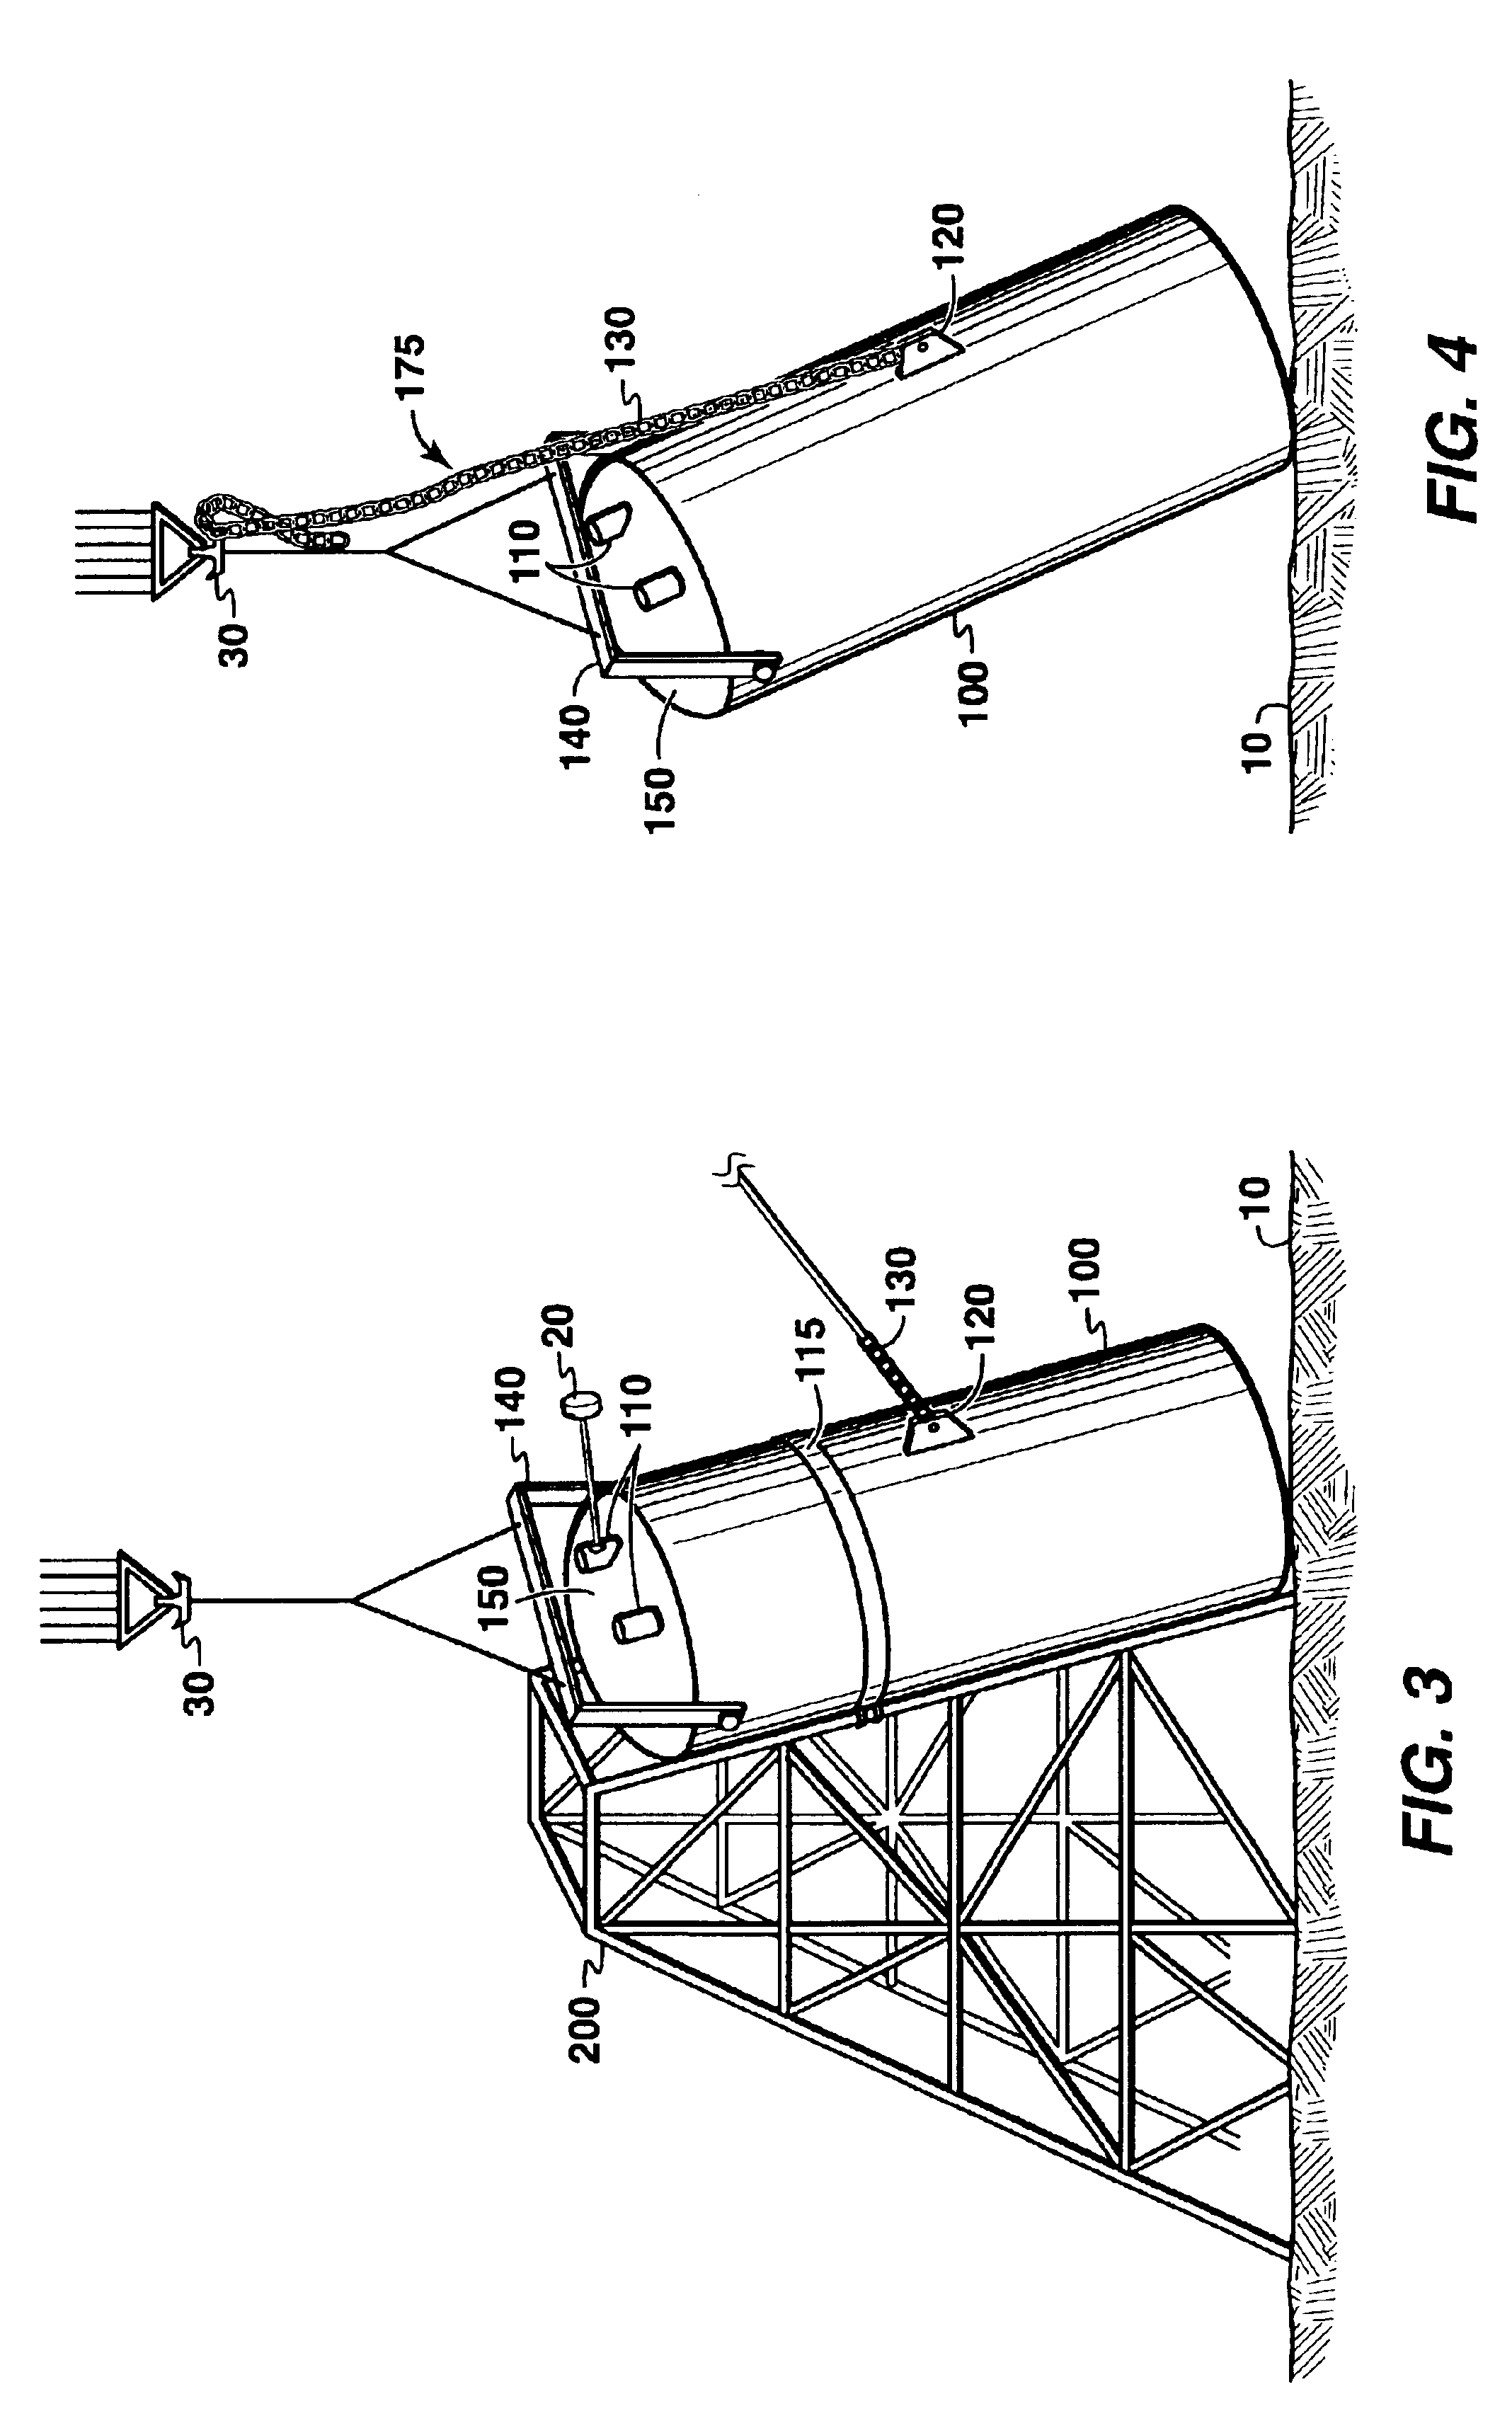 Method for installing a pile anchor